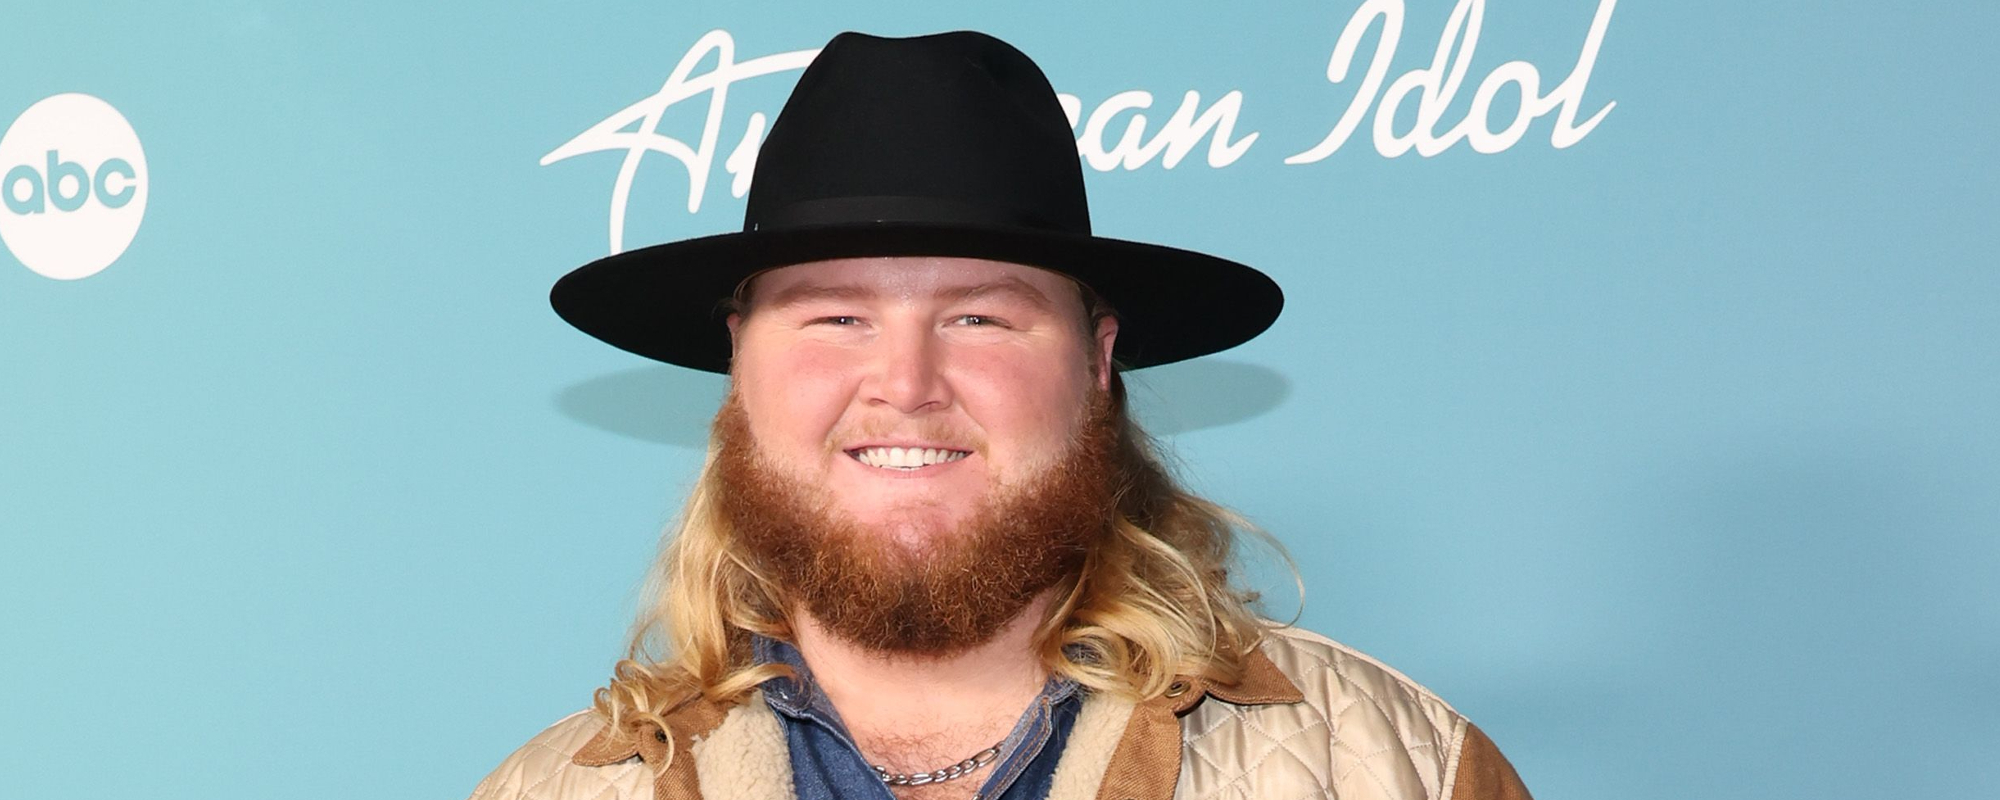 'American Idol' Will Moseley Enjoying Some Sunshine Before Heading on the Road With Zac Brown Band